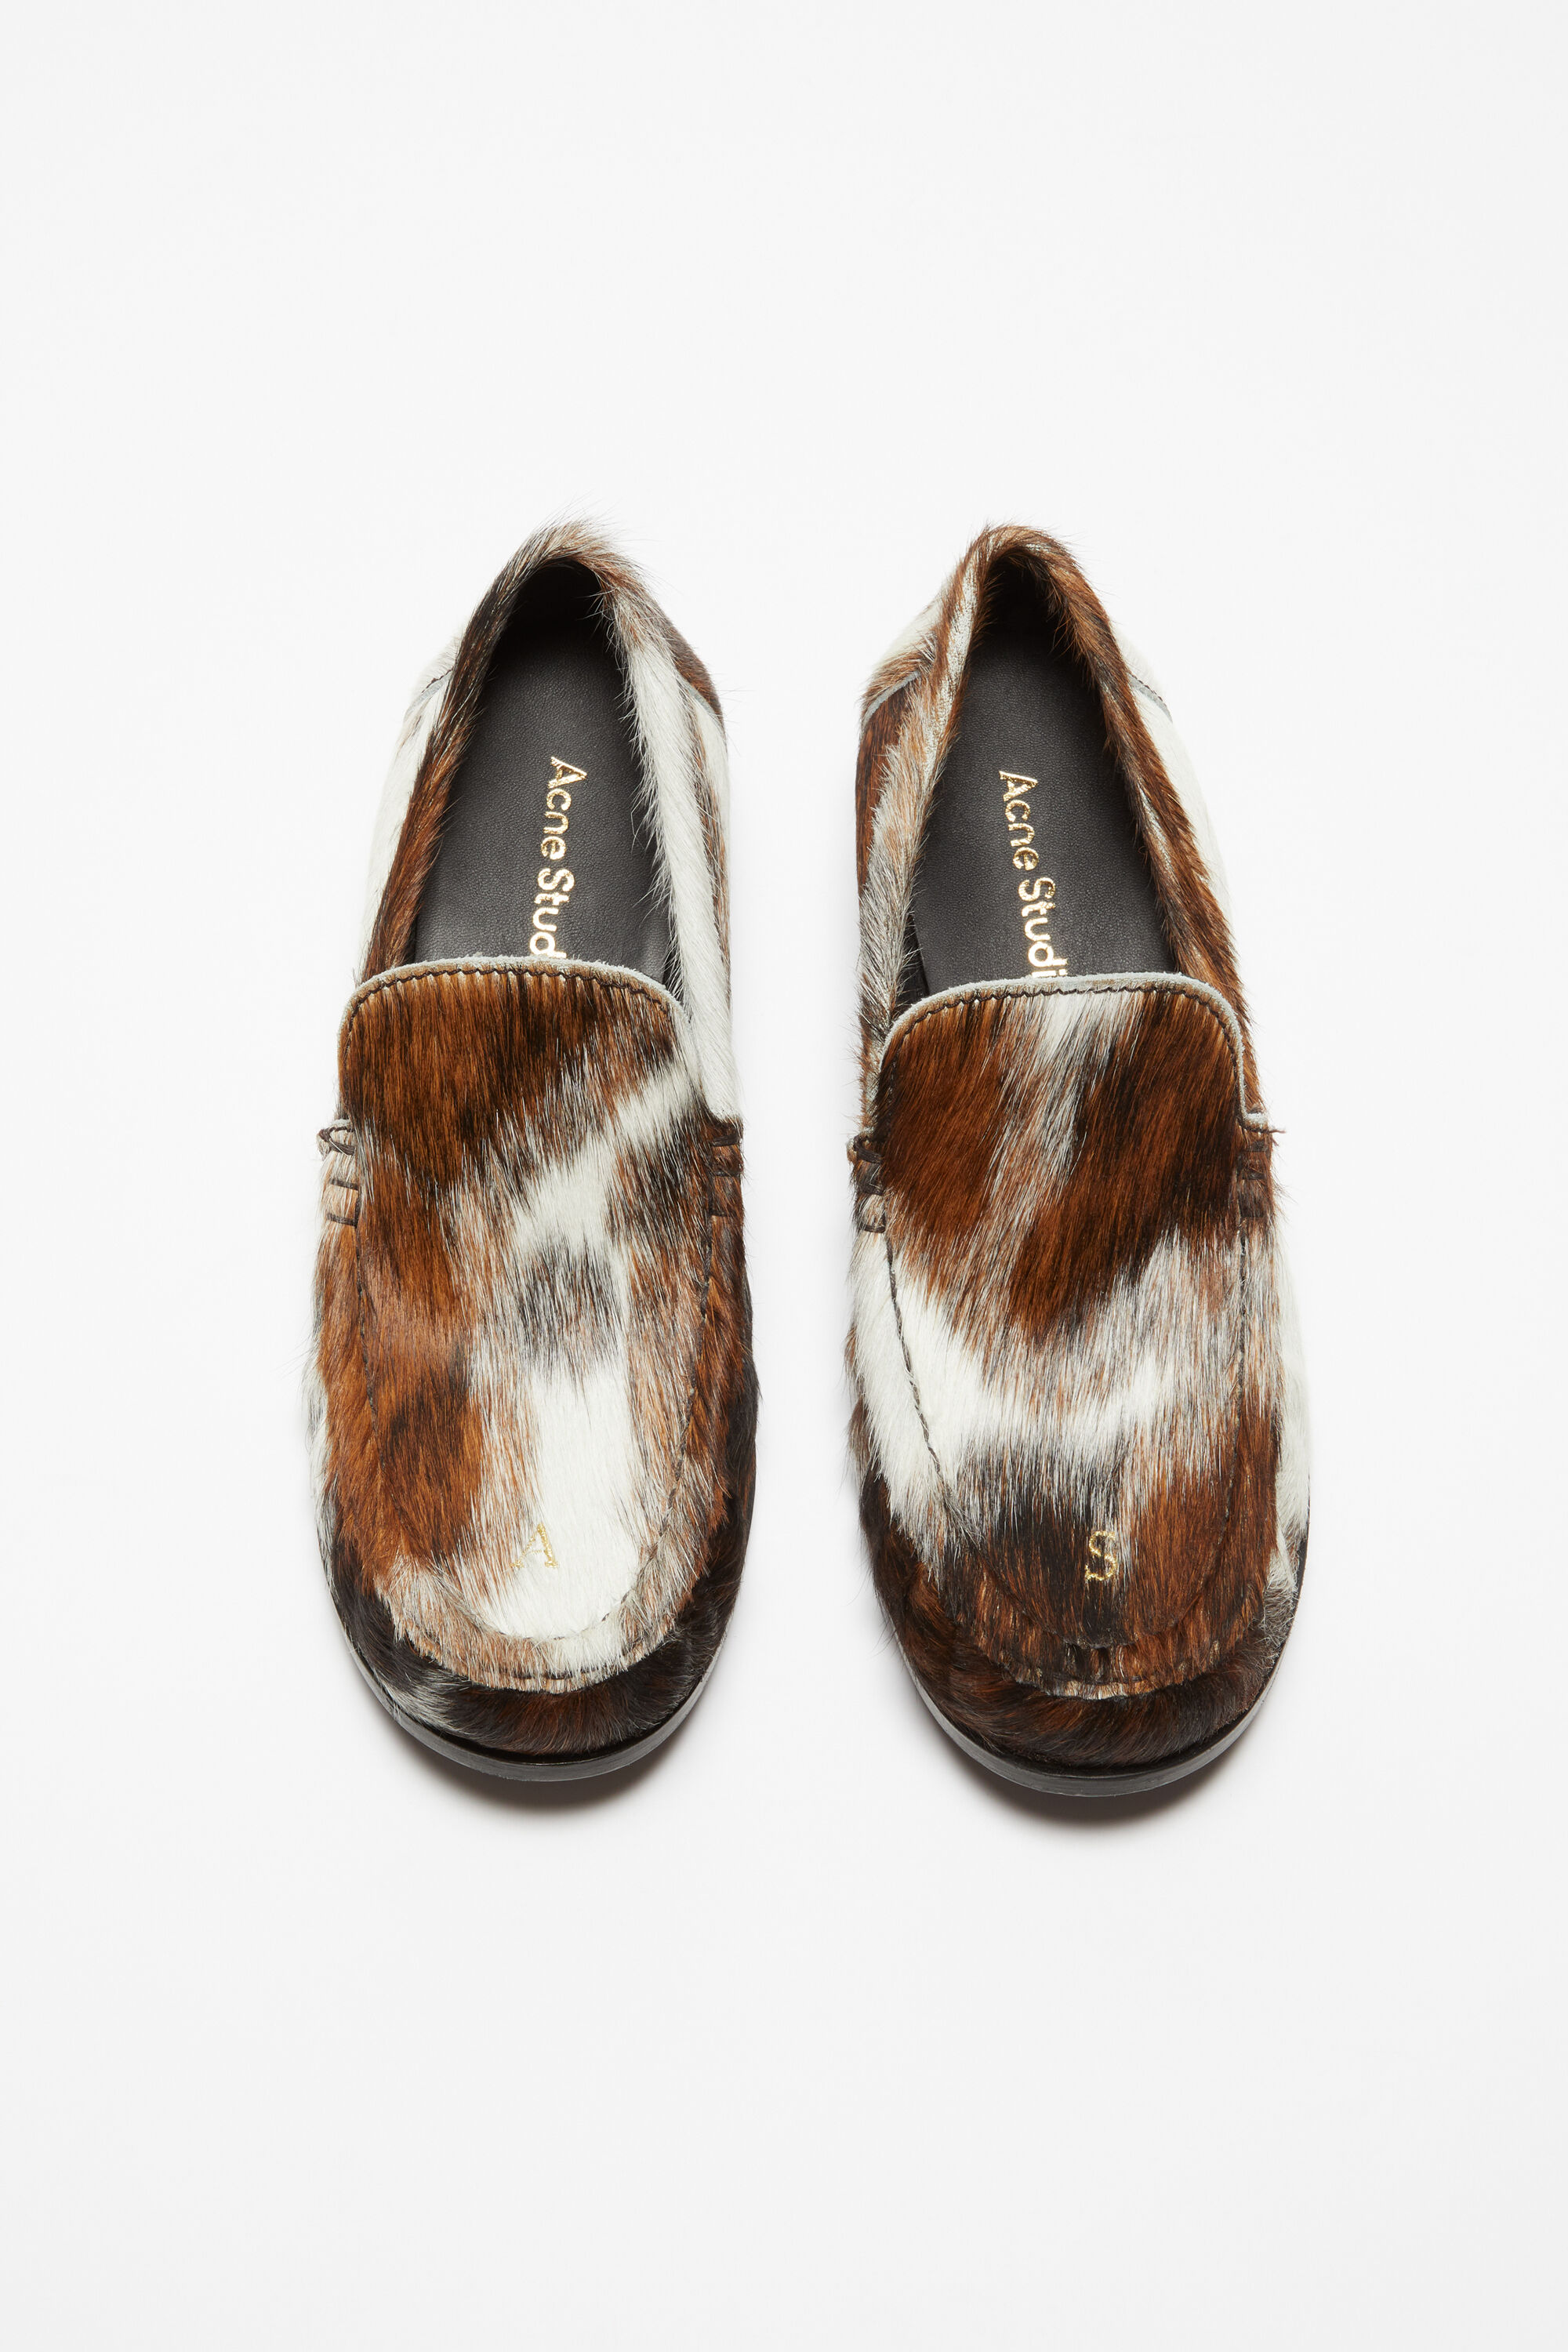 Acne Studios - Leather loafers - Multi brown